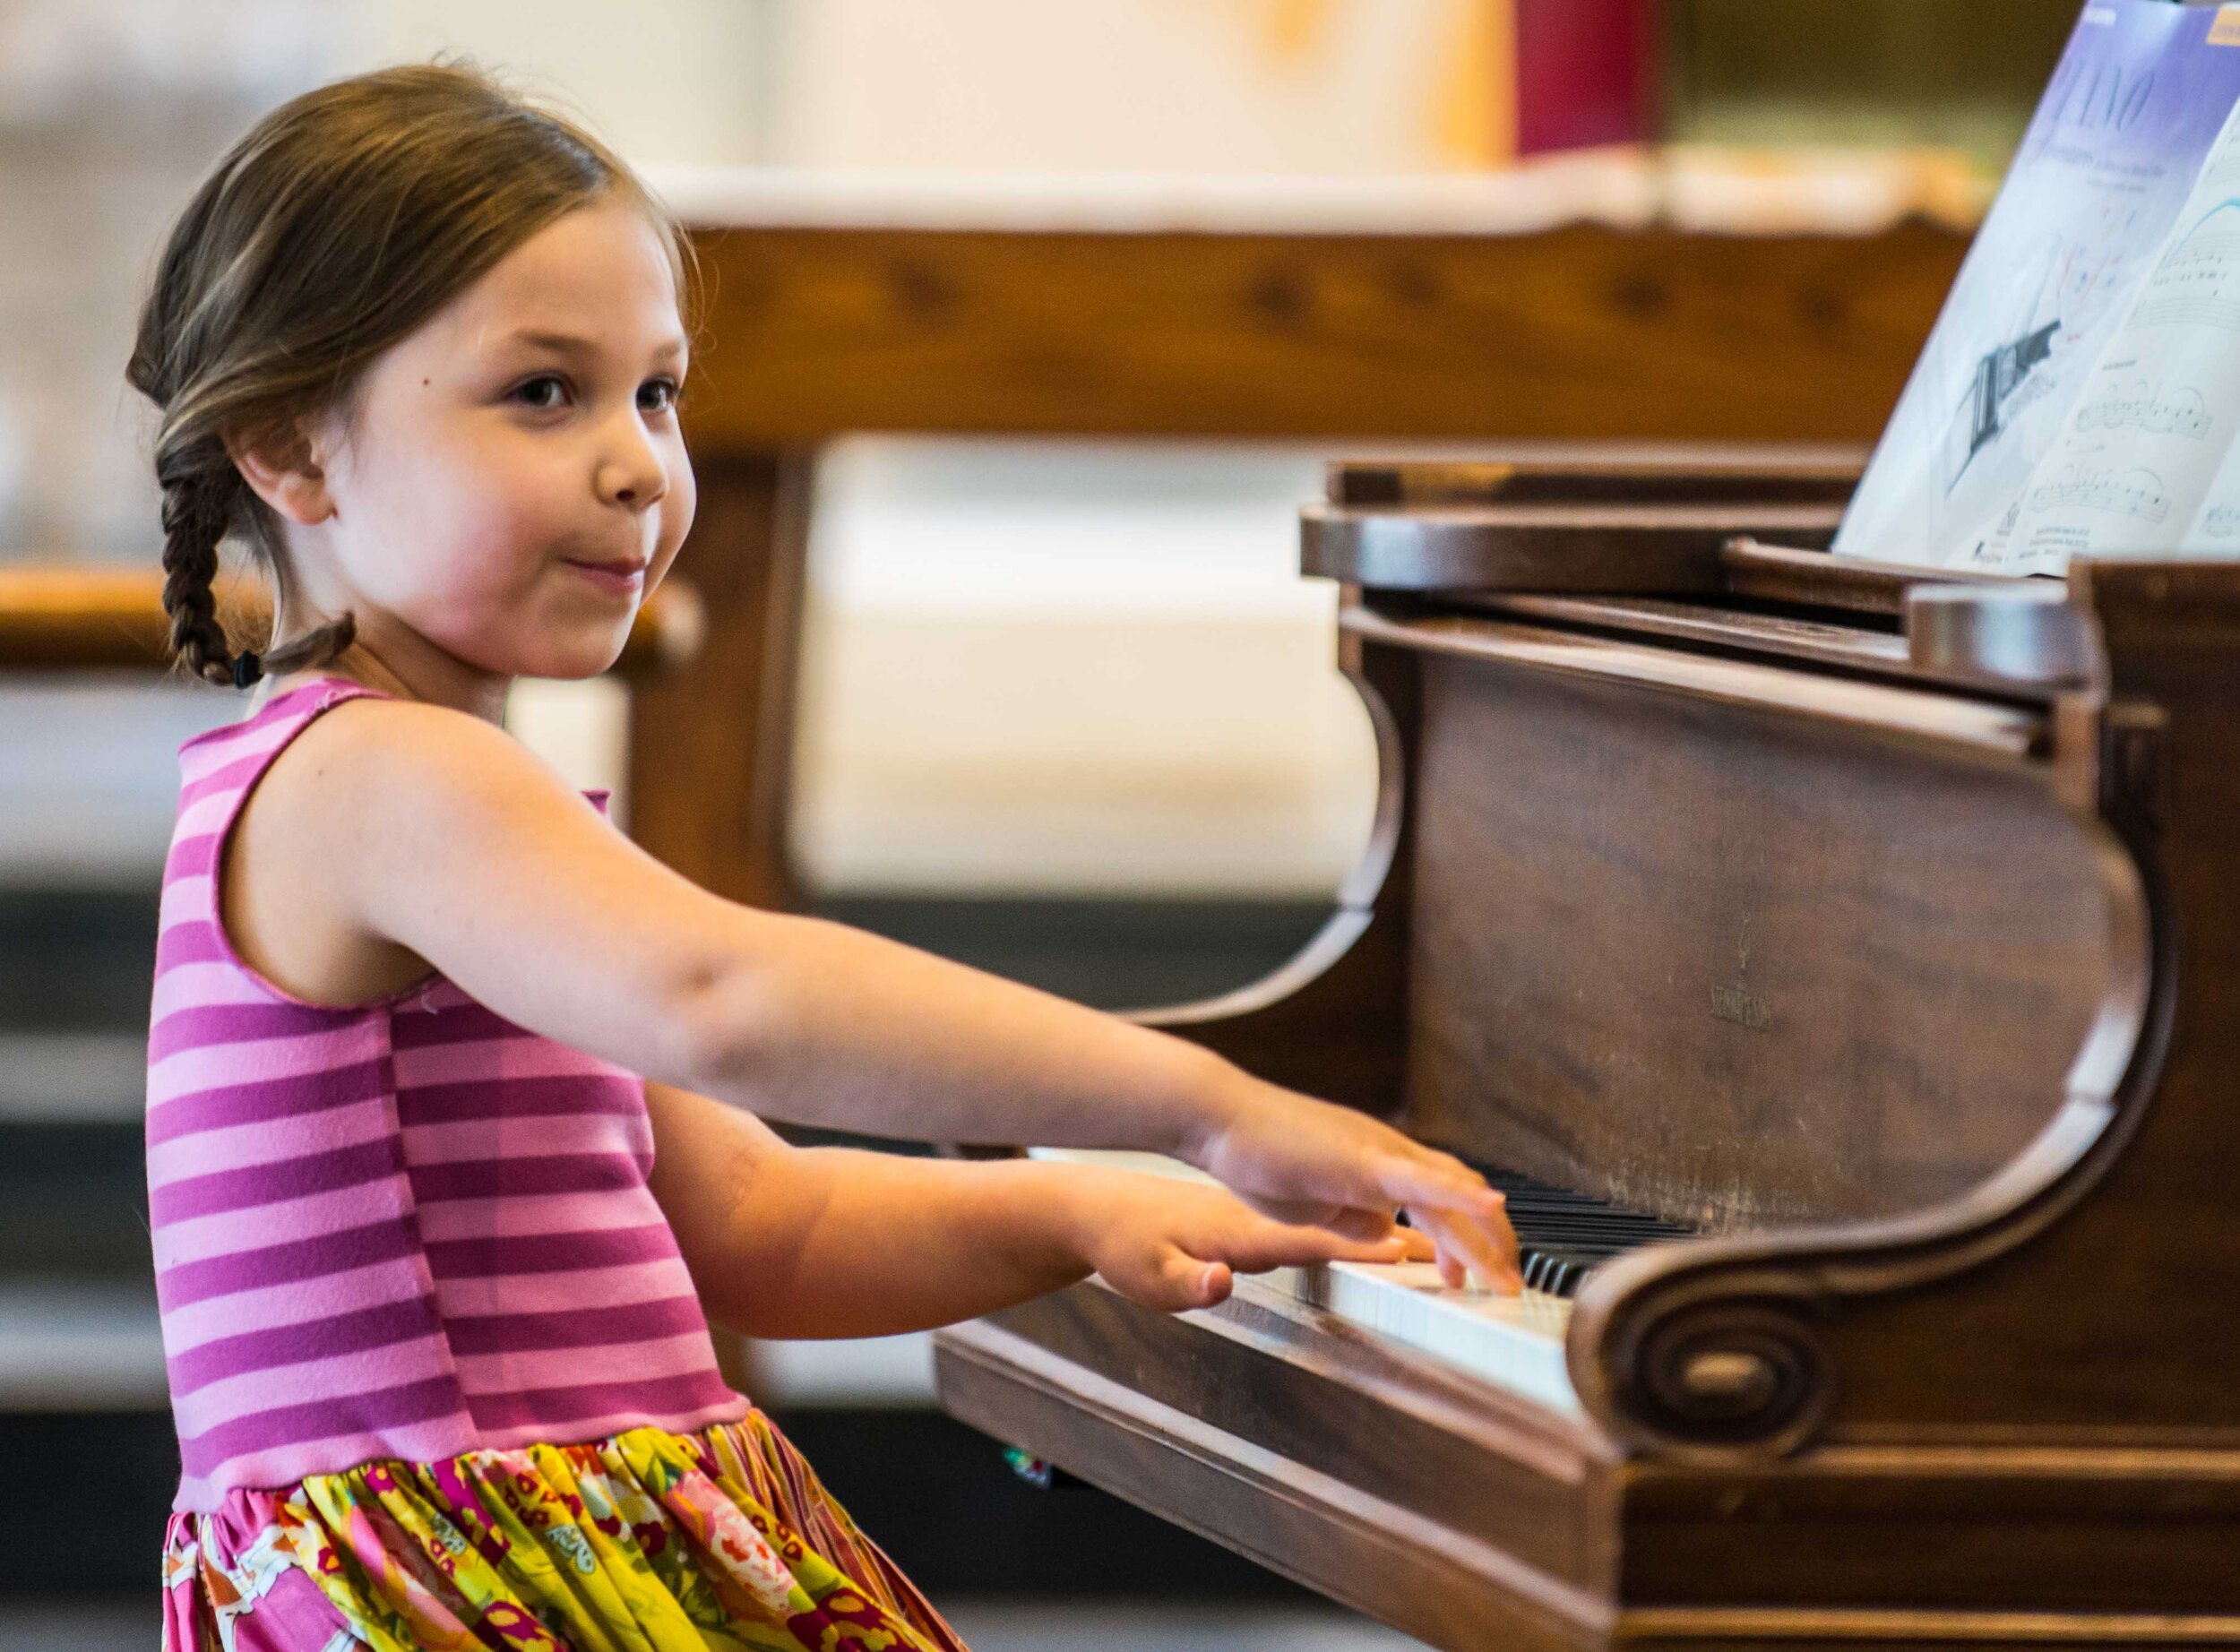   Music Lessons   in Mendota Heights   for beginner, intermediate, and advanced students of all ages   CALL  651-263-9475  TO SCHEDULE YOUR FIRST LESSON   REQUEST INFO  